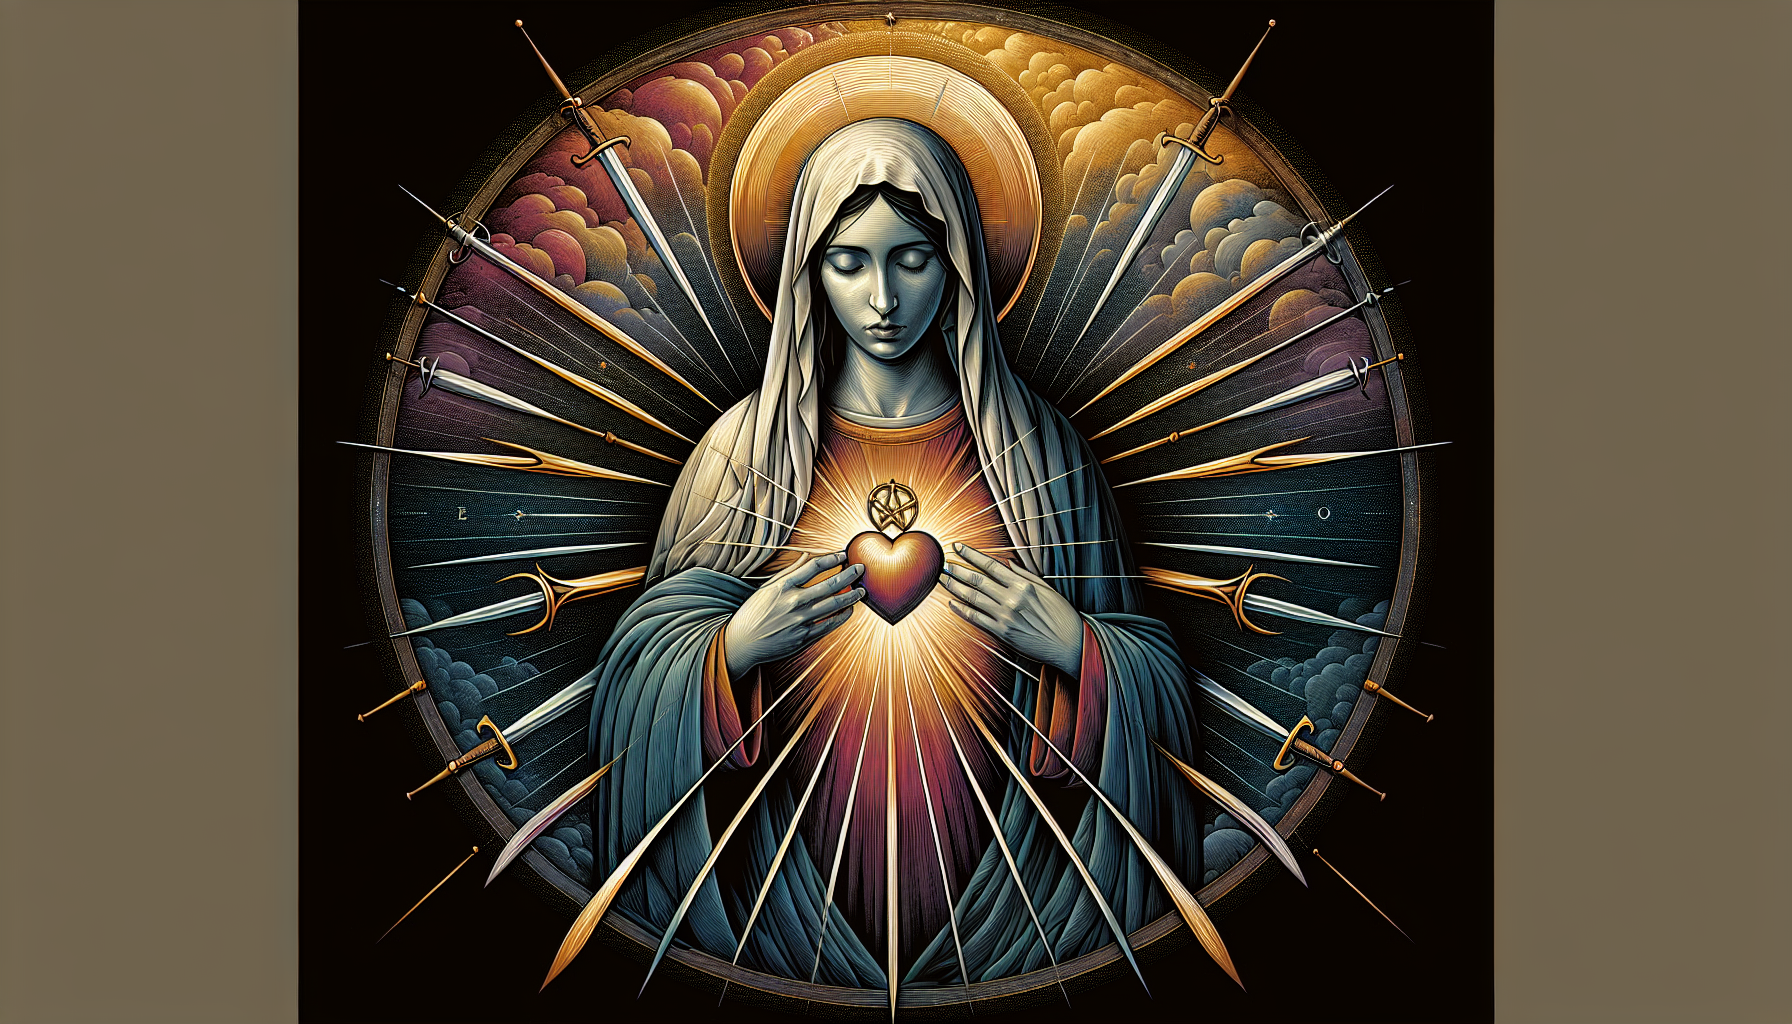 Create an image of the Virgin Mary depicted with seven symbolic swords radiating around her heart, each representing one of her sorrows. The background should evoke a somber, reflective mood with a mi